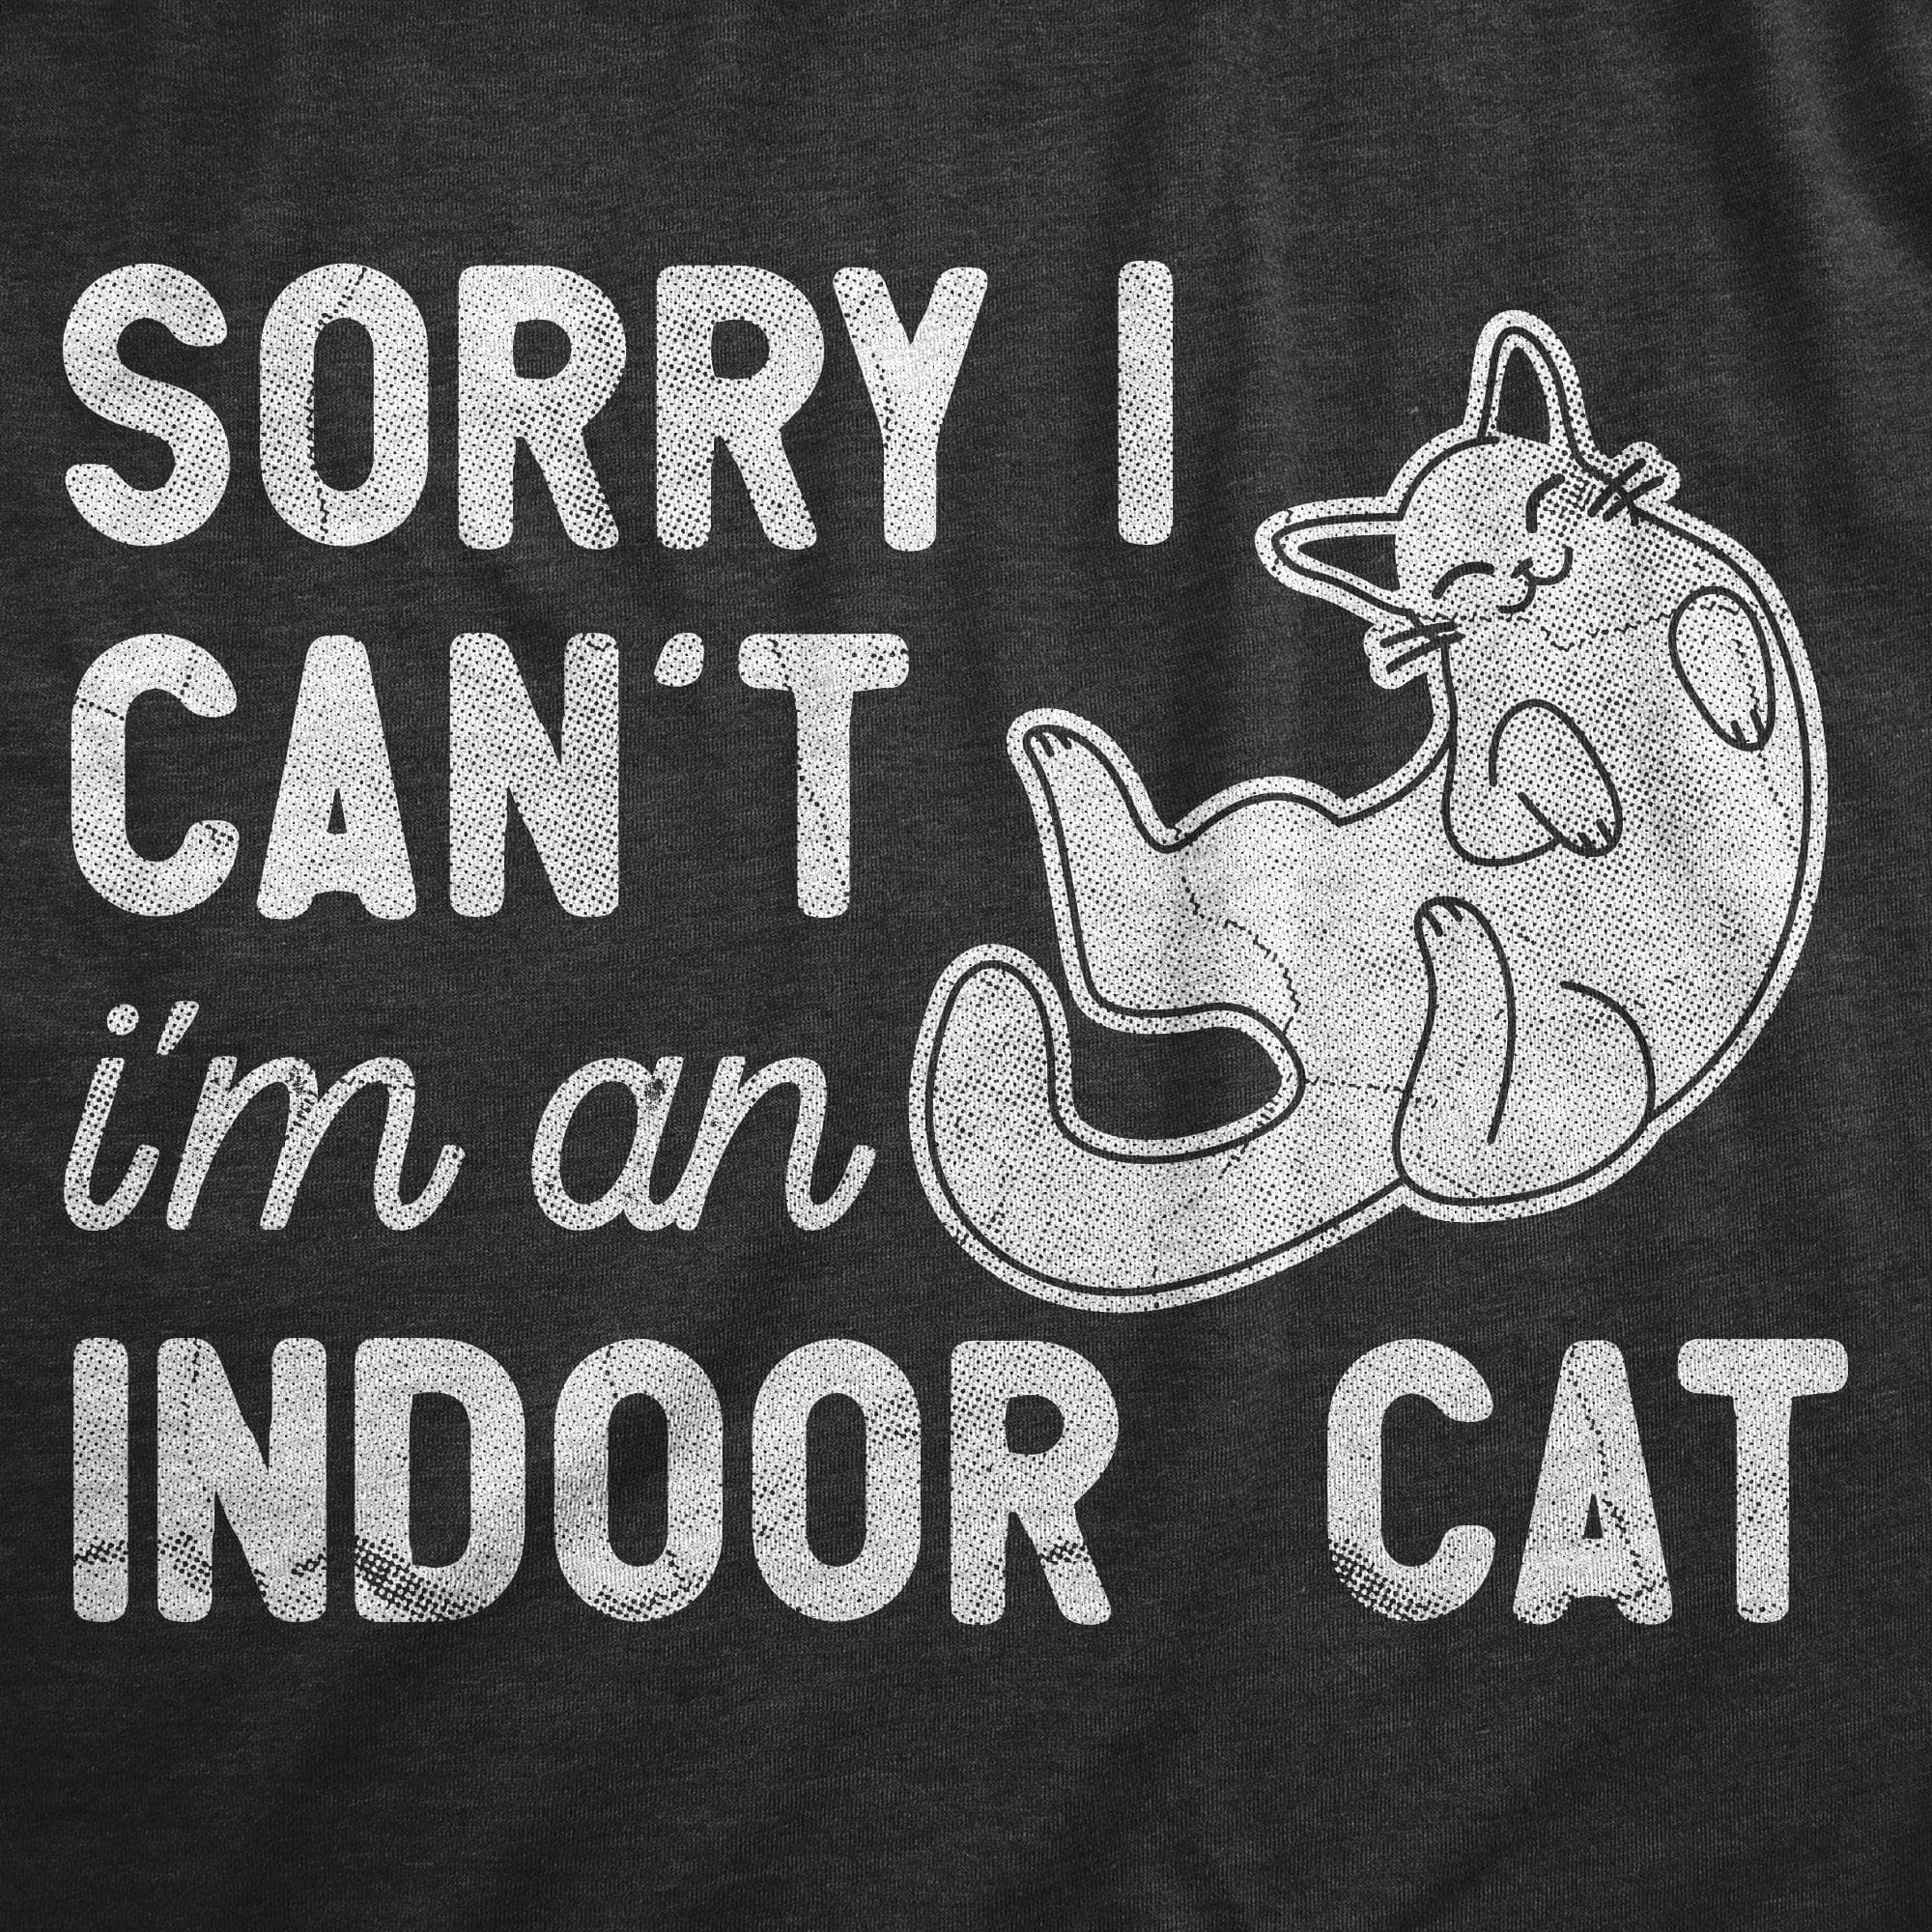 Sorry I Cant Im An Indoor Cat Women's Tshirt  -  Crazy Dog T-Shirts